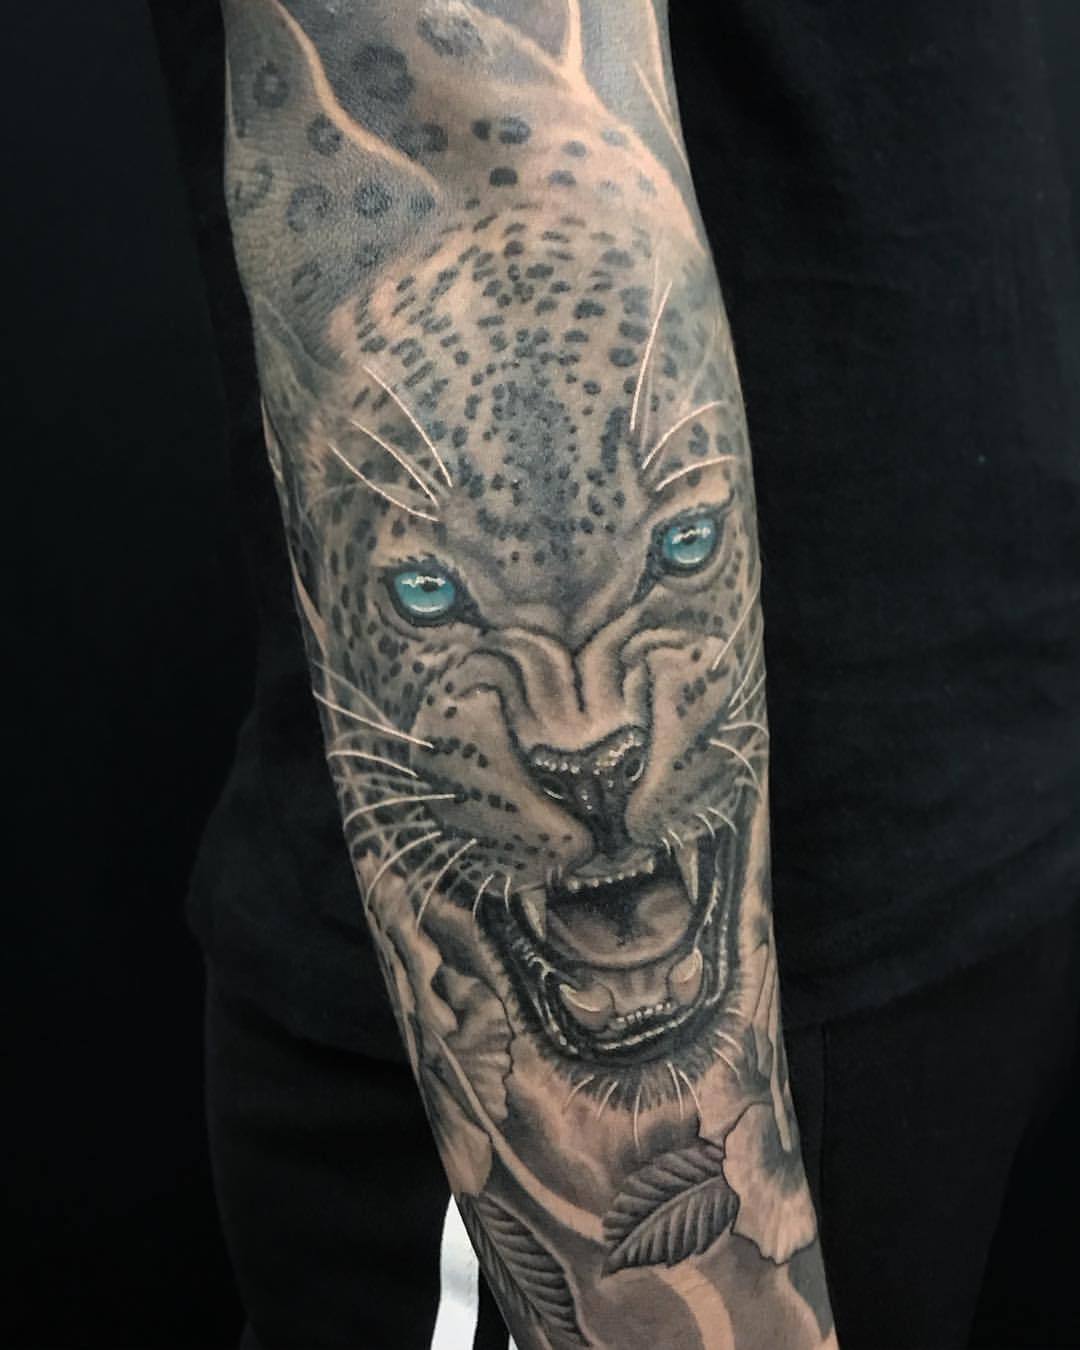 UPDATED 20 Proud Black Panther Tattoos